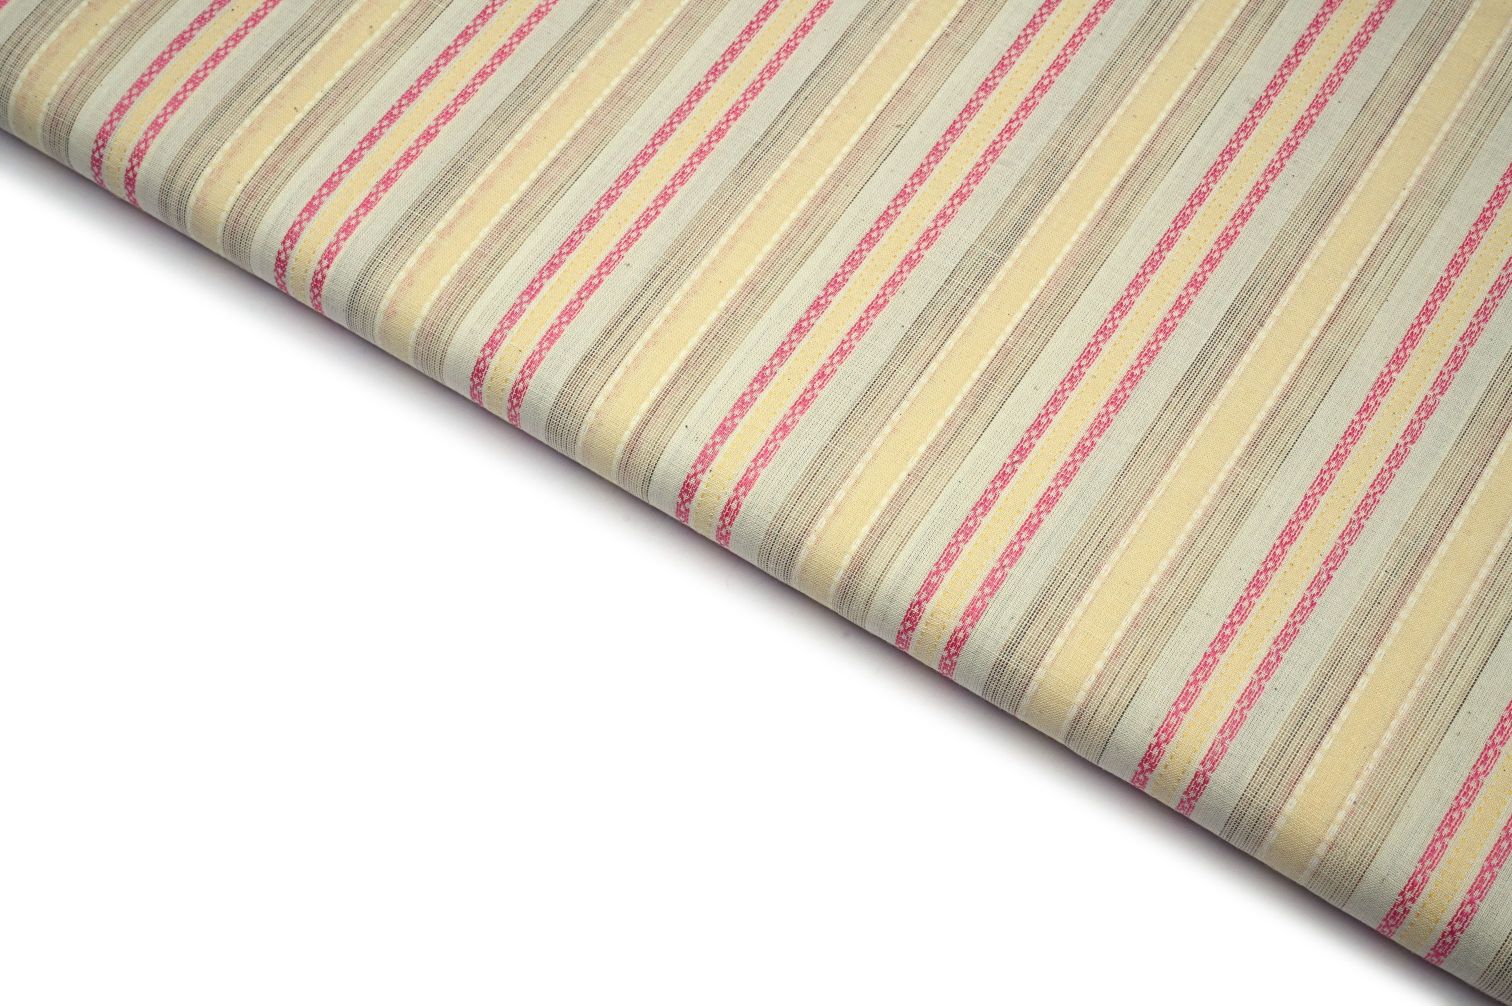 CREAM COLOR PINK & YELLOW WEAVE CROSS COLOR STRIPES PATTERN COTTON VOIL HANDLOOM FABRIC 11552